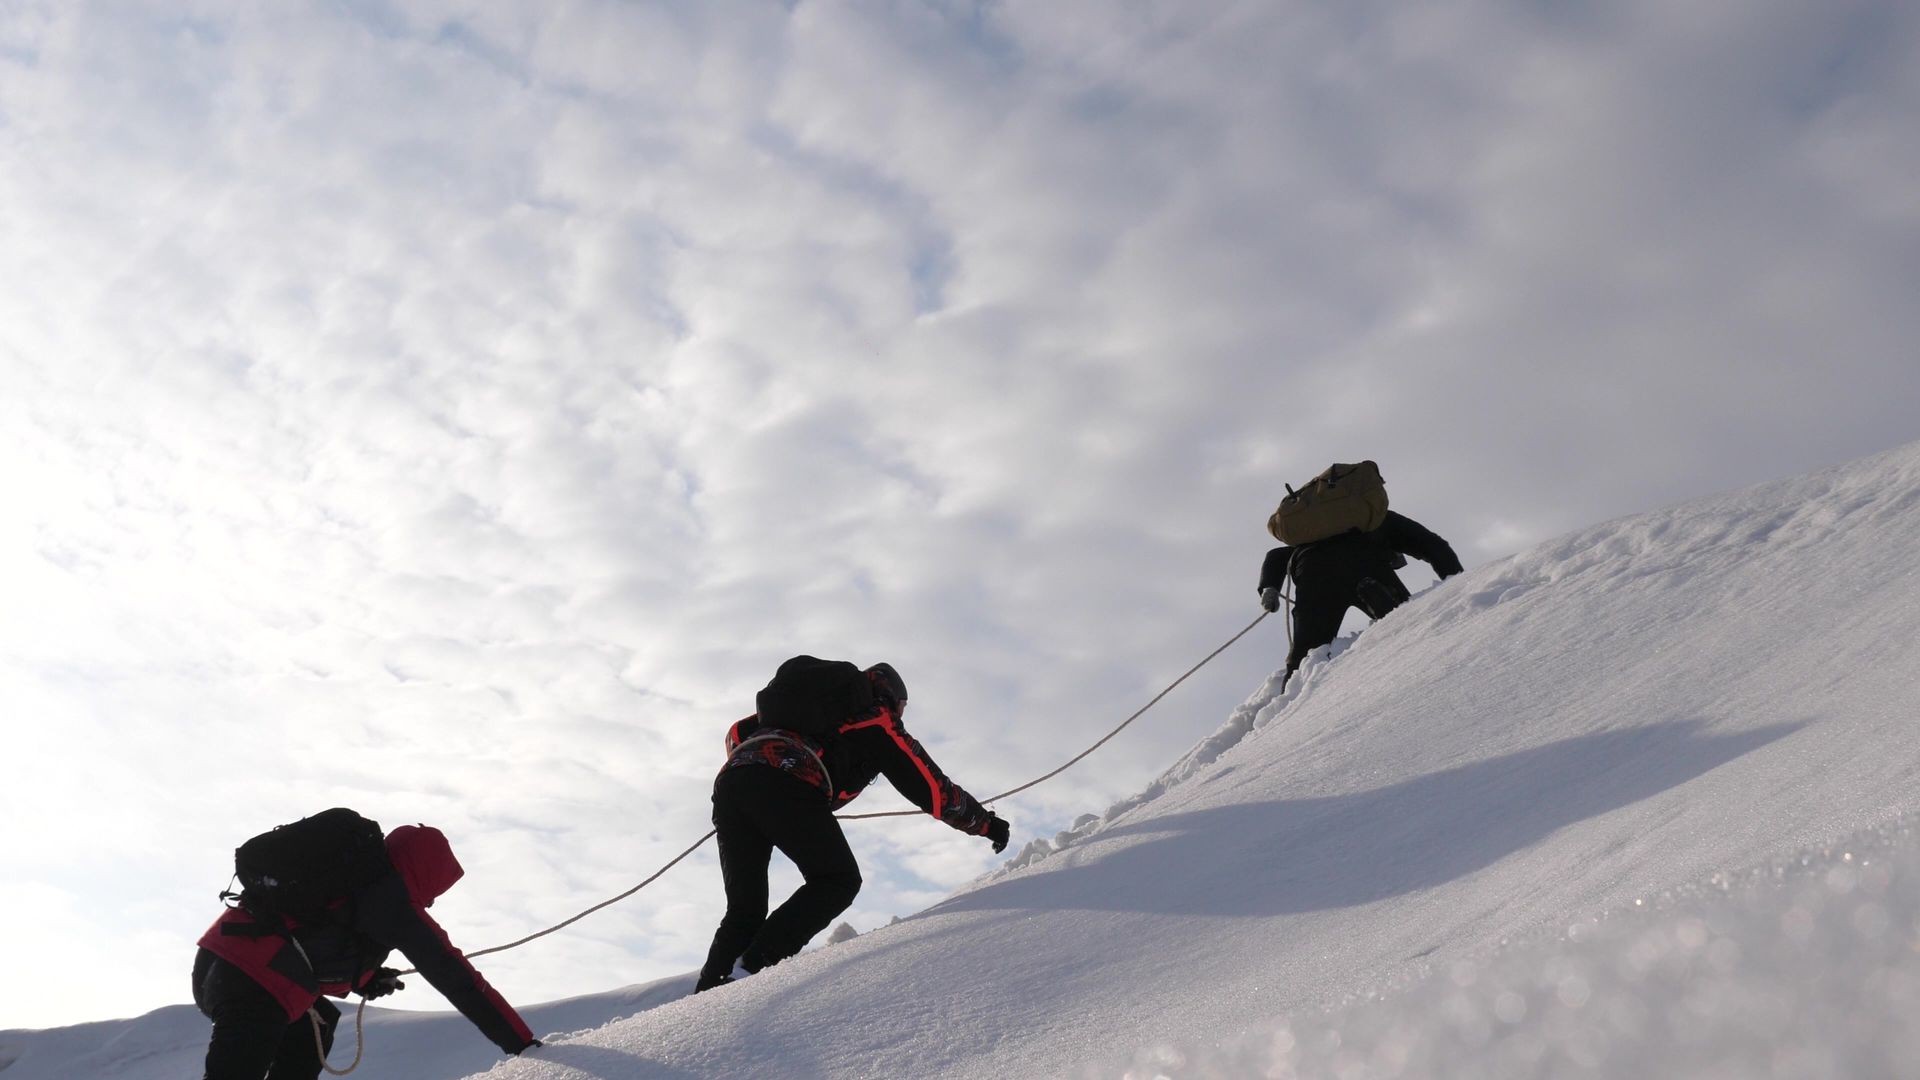 three Alpenists in winter climb rope on mountain. Travelers climb rope to their victory through snow uphill in strong wind. tourists in winter work together as team overcoming difficulties.